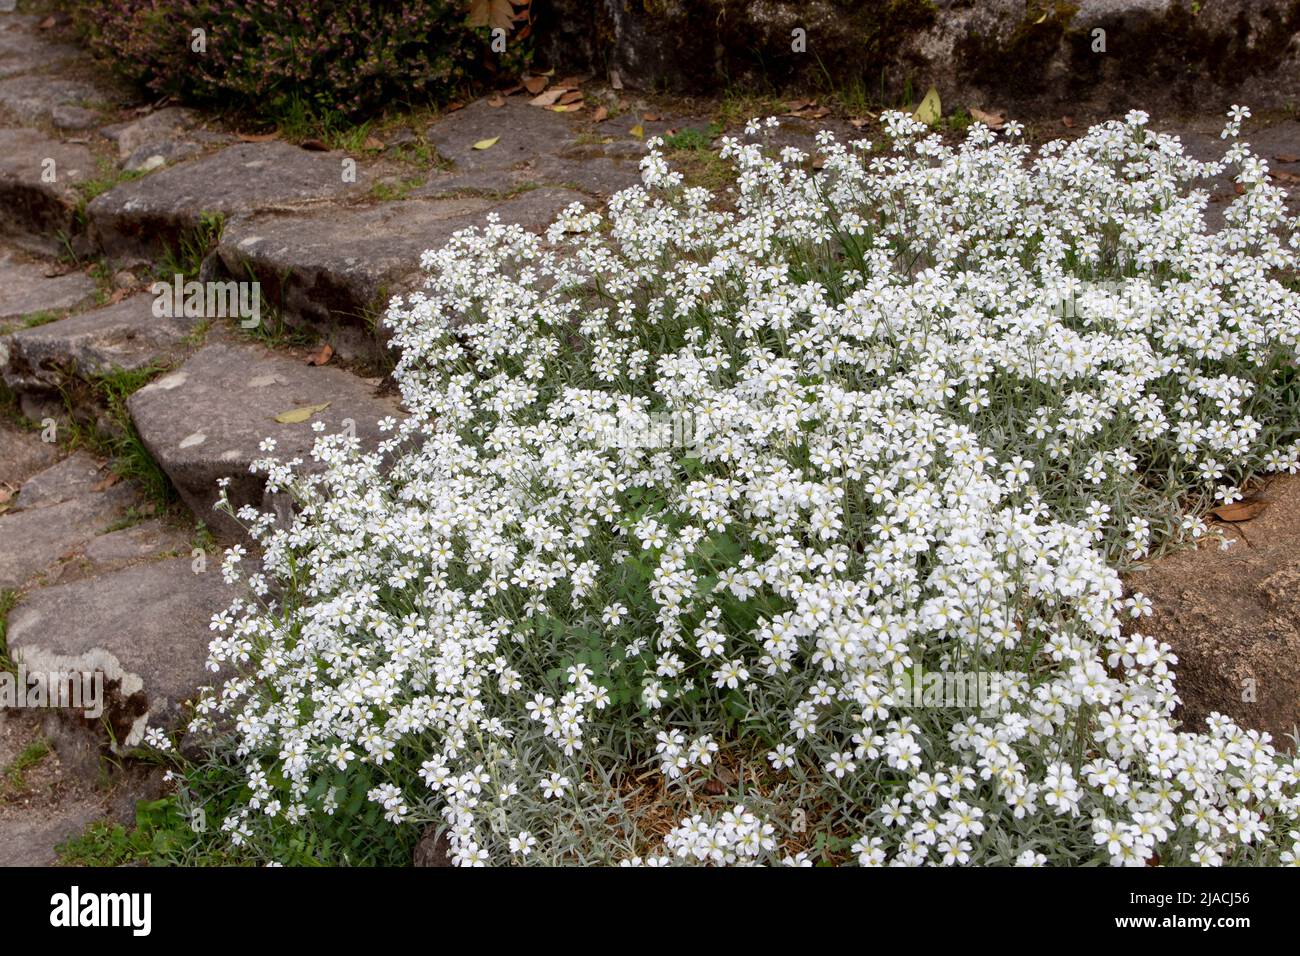 Cerastium tomentosum or snow-in-summer low spreading flowering plant covered with small white flowers in the rocary Stock Photo